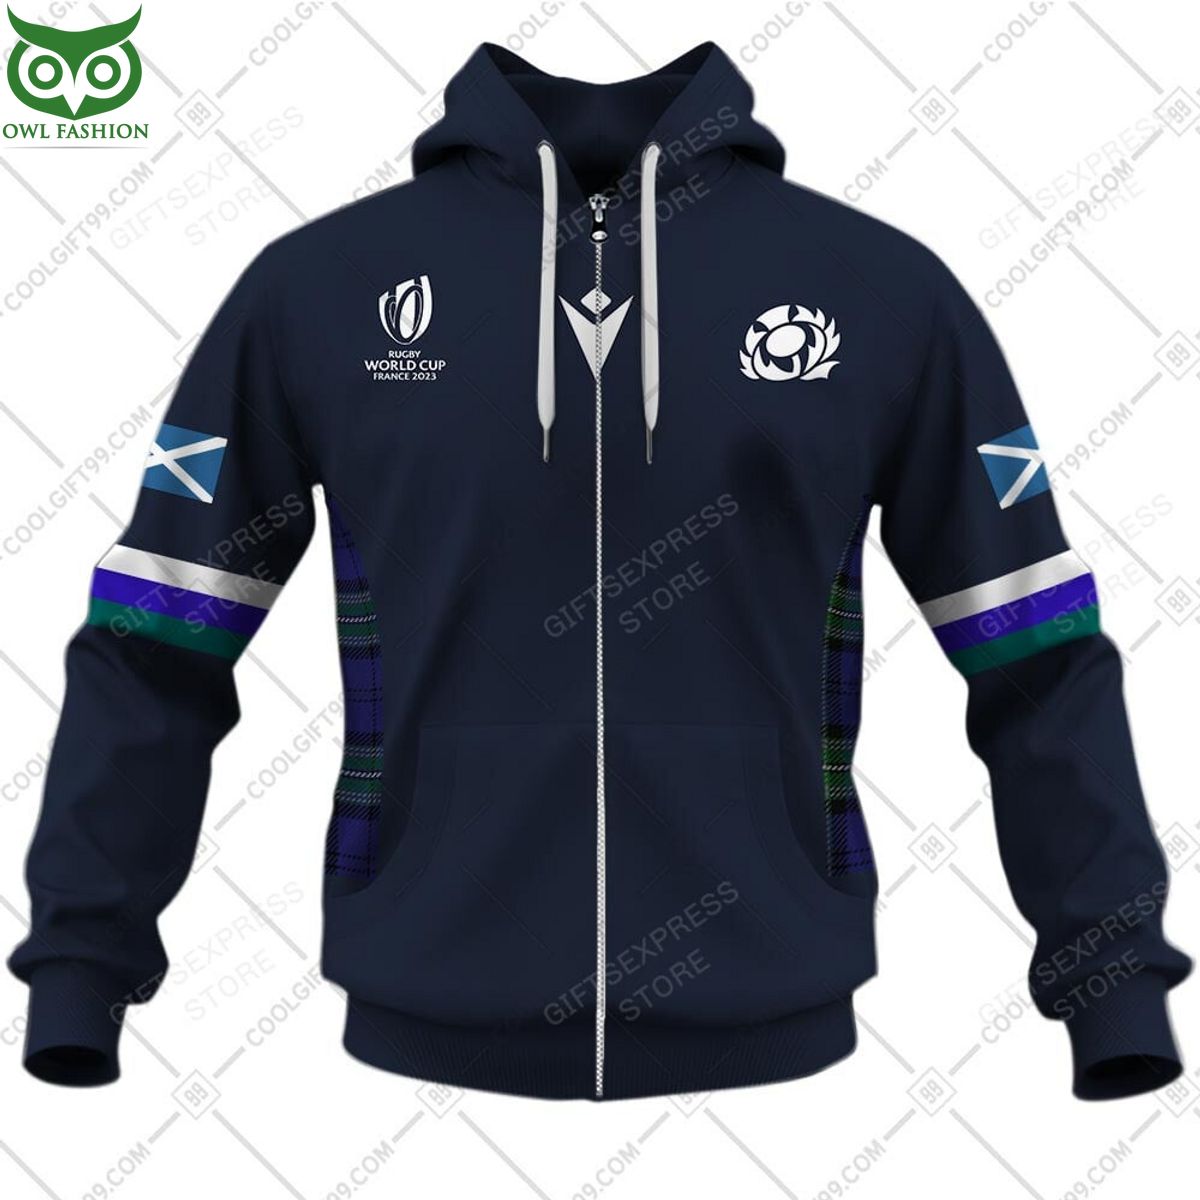 rugby world cup scotland home jersey personalized 3d hoodie tshirt 7 0tB7P.jpg